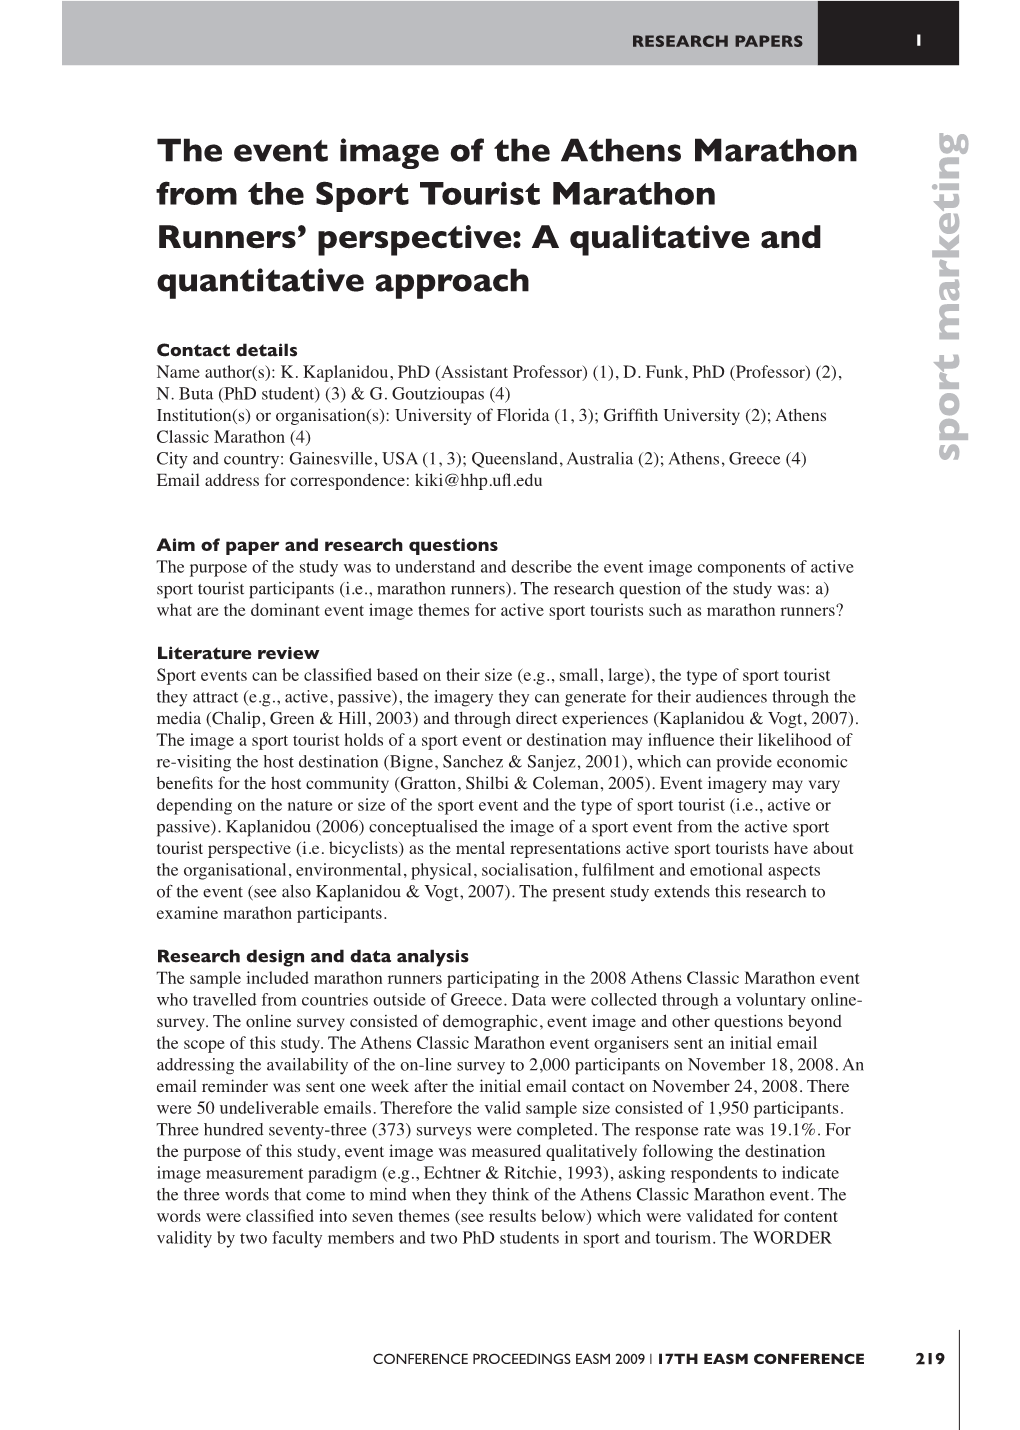 The Event Image of the Athens Marathon from the Sport Tourist Marathon Runners’ Perspective: a Qualitative and Quantitative Approach